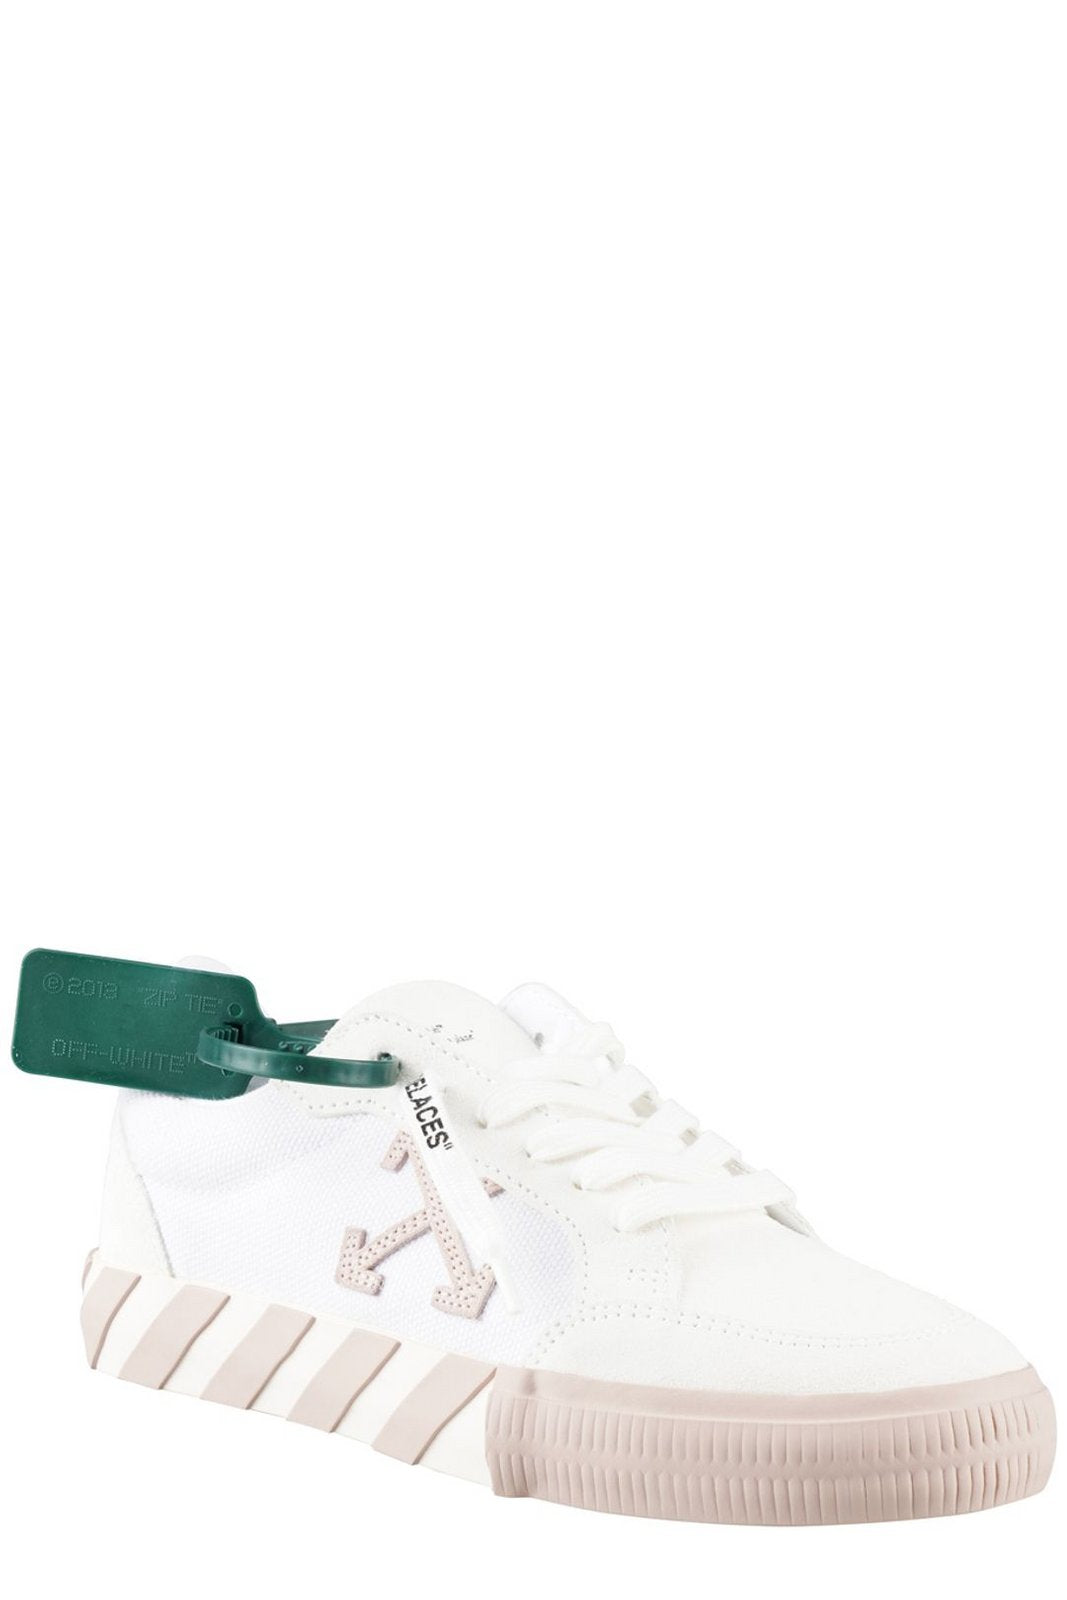 Off-White Arrows Patch Low-Top Sneakers